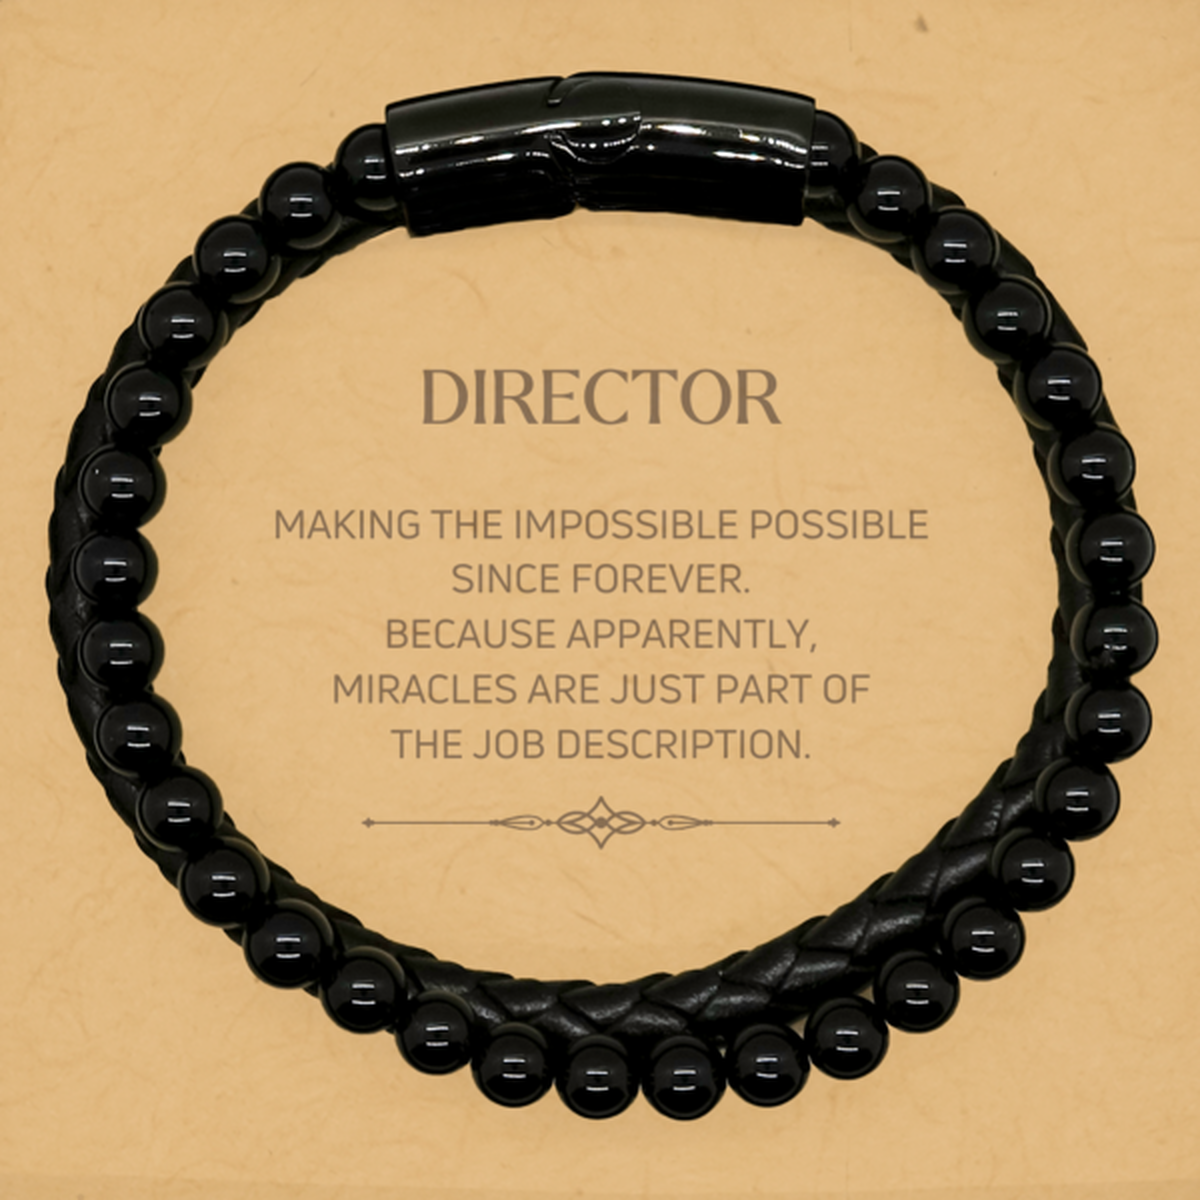 Funny Director Gifts, Miracles are just part of the job description, Inspirational Birthday Stone Leather Bracelets For Director, Men, Women, Coworkers, Friends, Boss